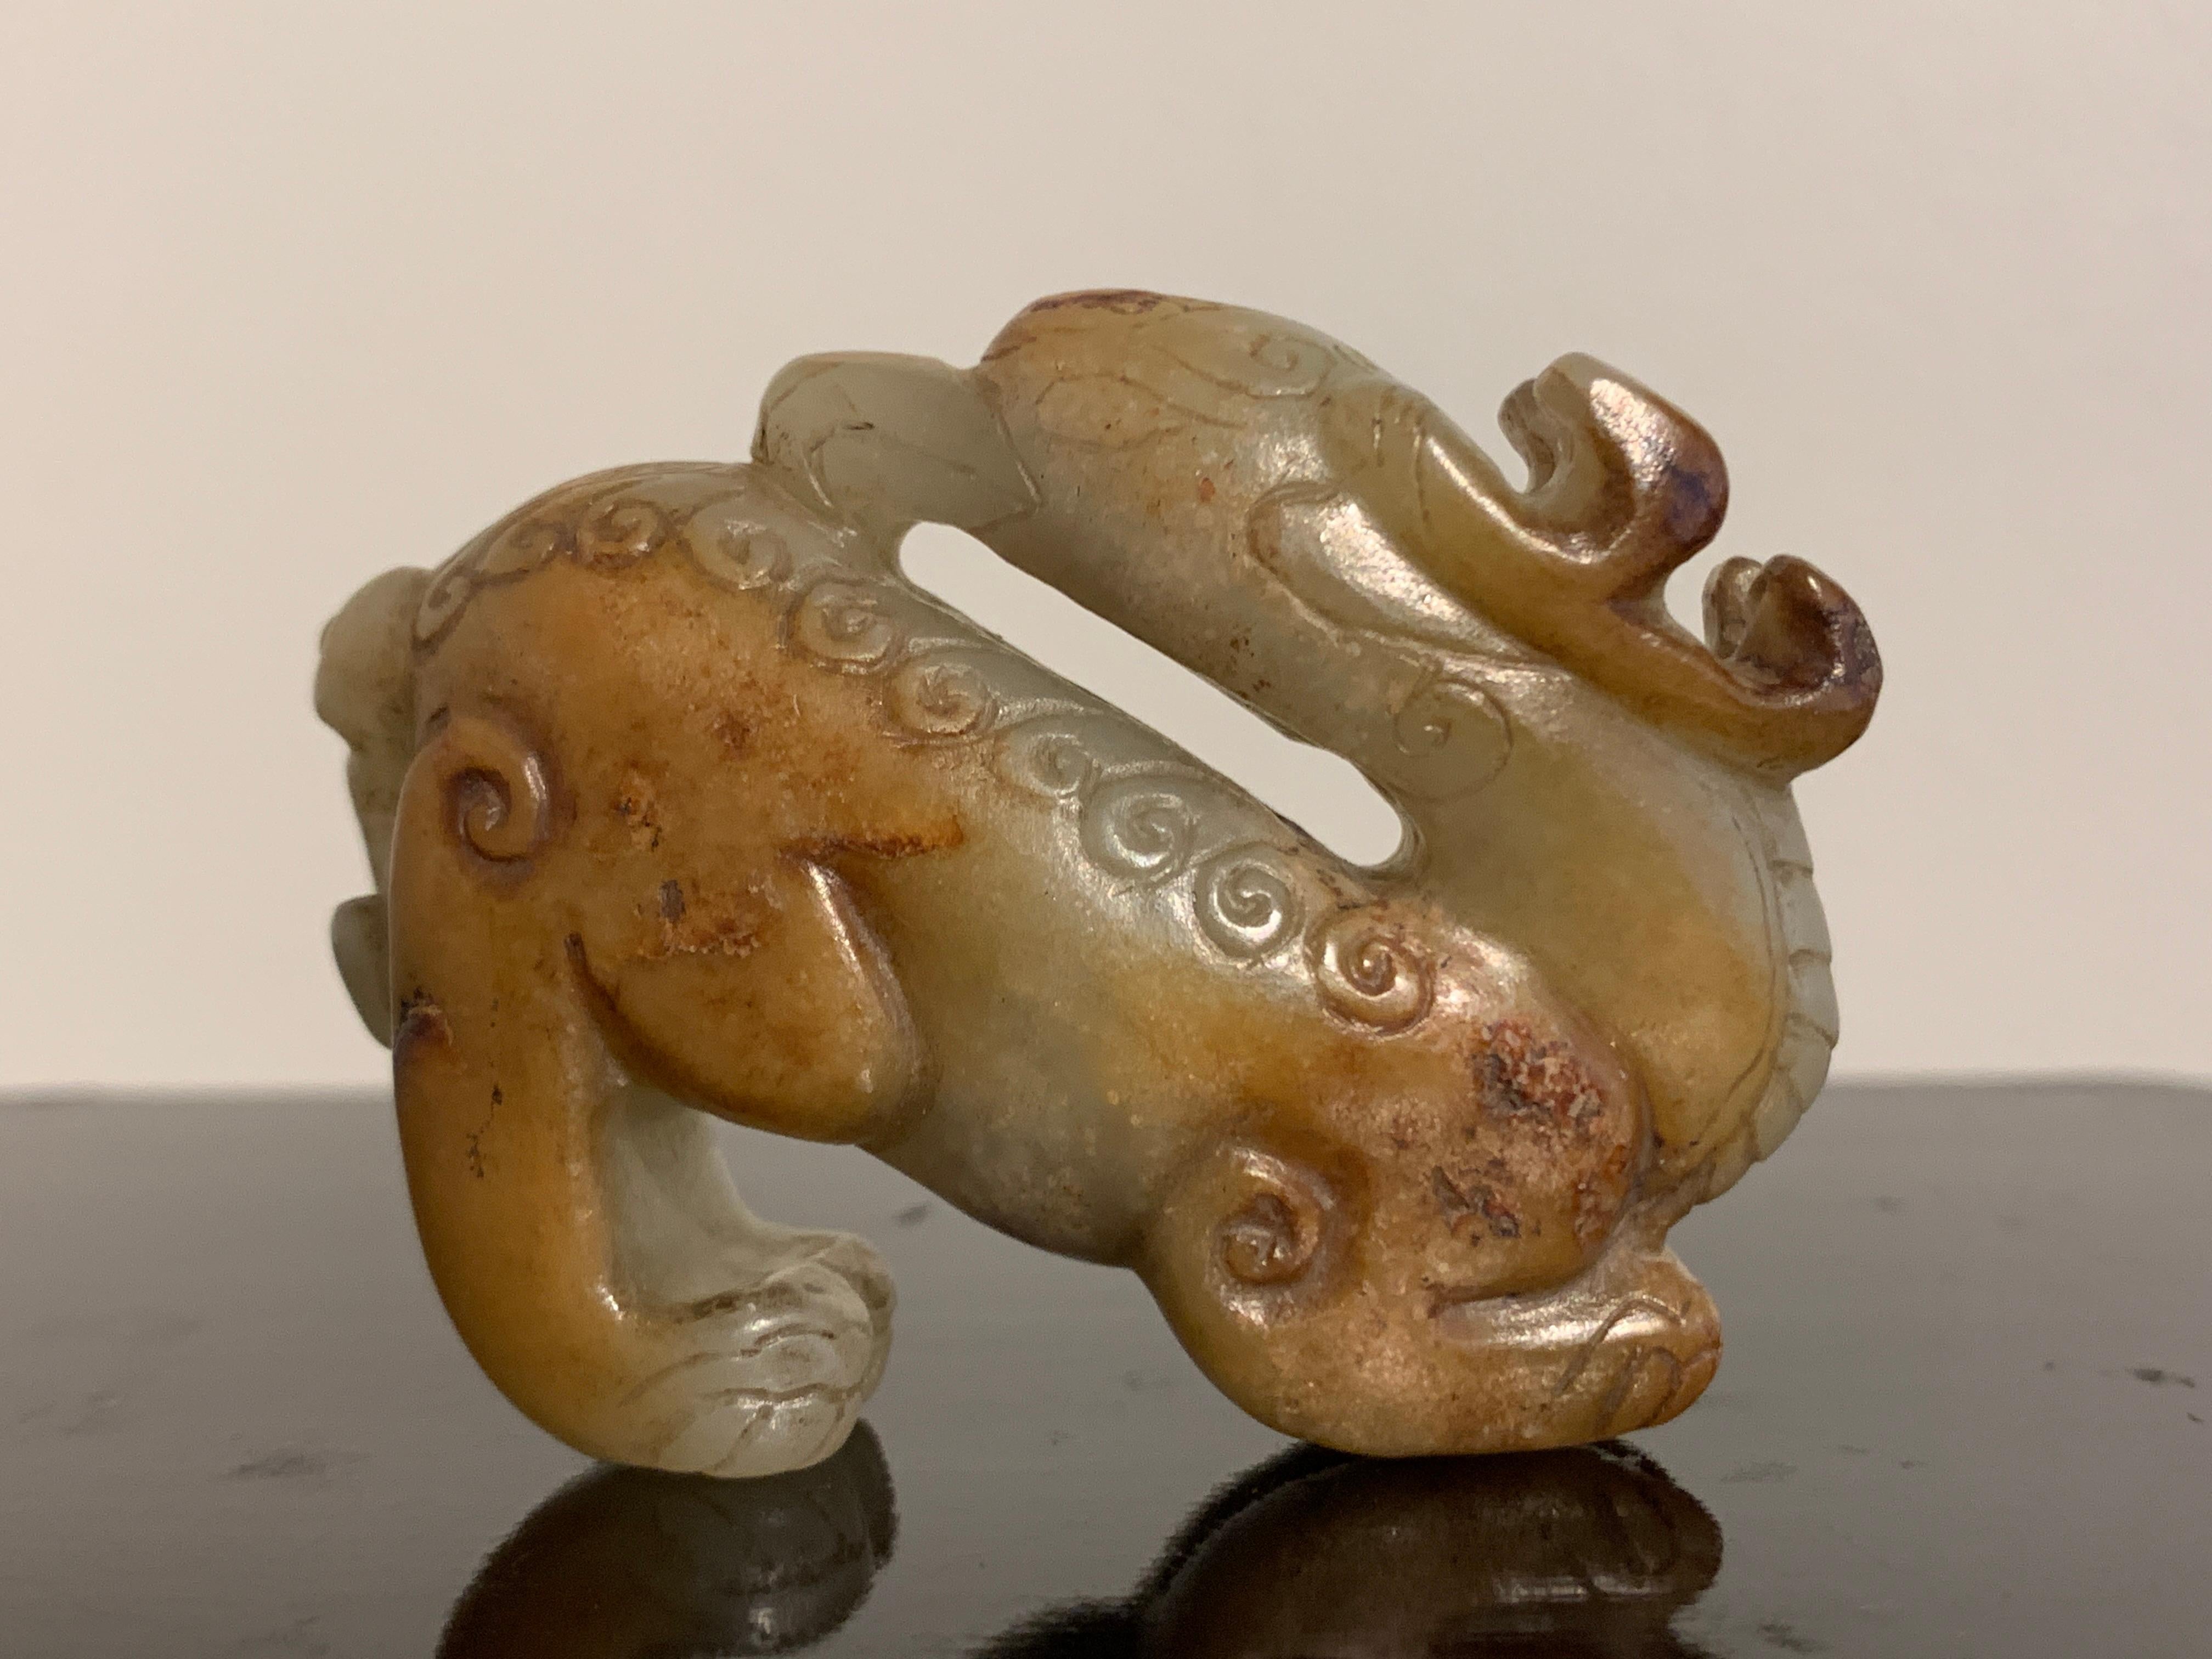 A fine and unusual carving of a mythical animal, possibly a pixiu, of celadon and russet nephrite jade, Ming Dynasty or earlier, China.

The mythical animal masterfully carved as a chimera, with a pair of stag antlers, the head of an eagle, the